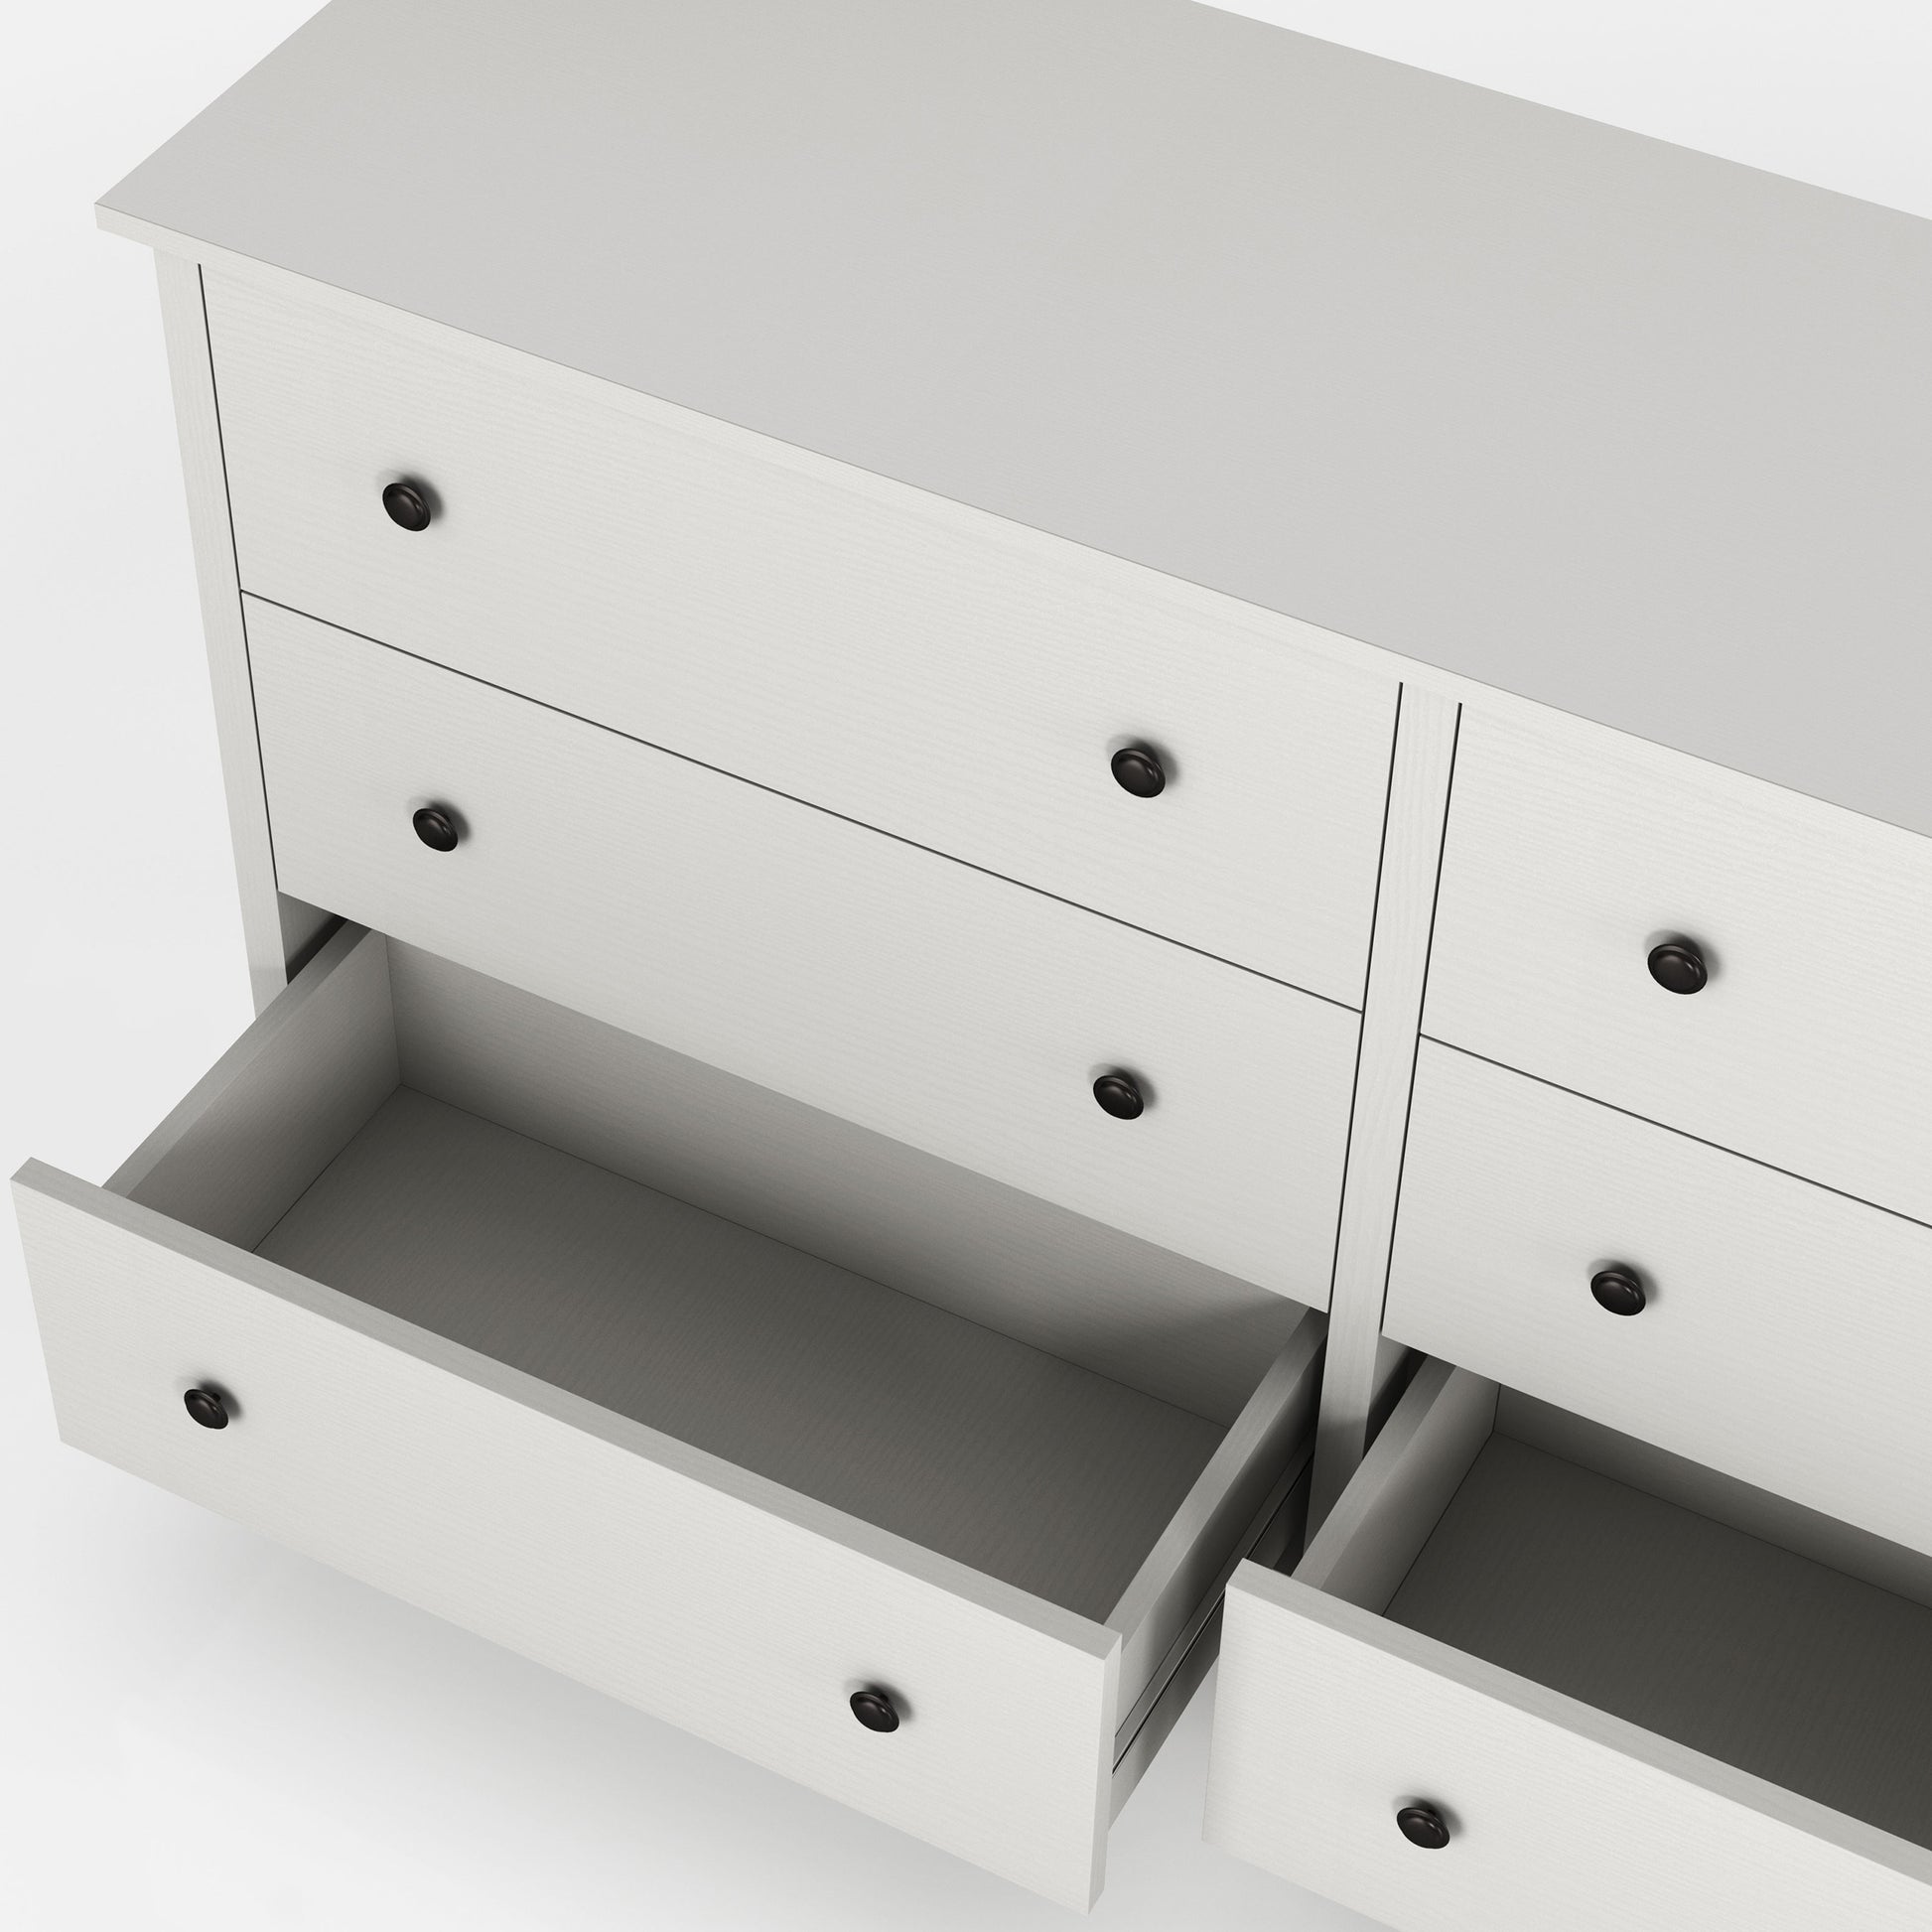 Left angled bird's eye close up view of a transitional white six-drawer youth dresser with two bottom drawers open on a white background